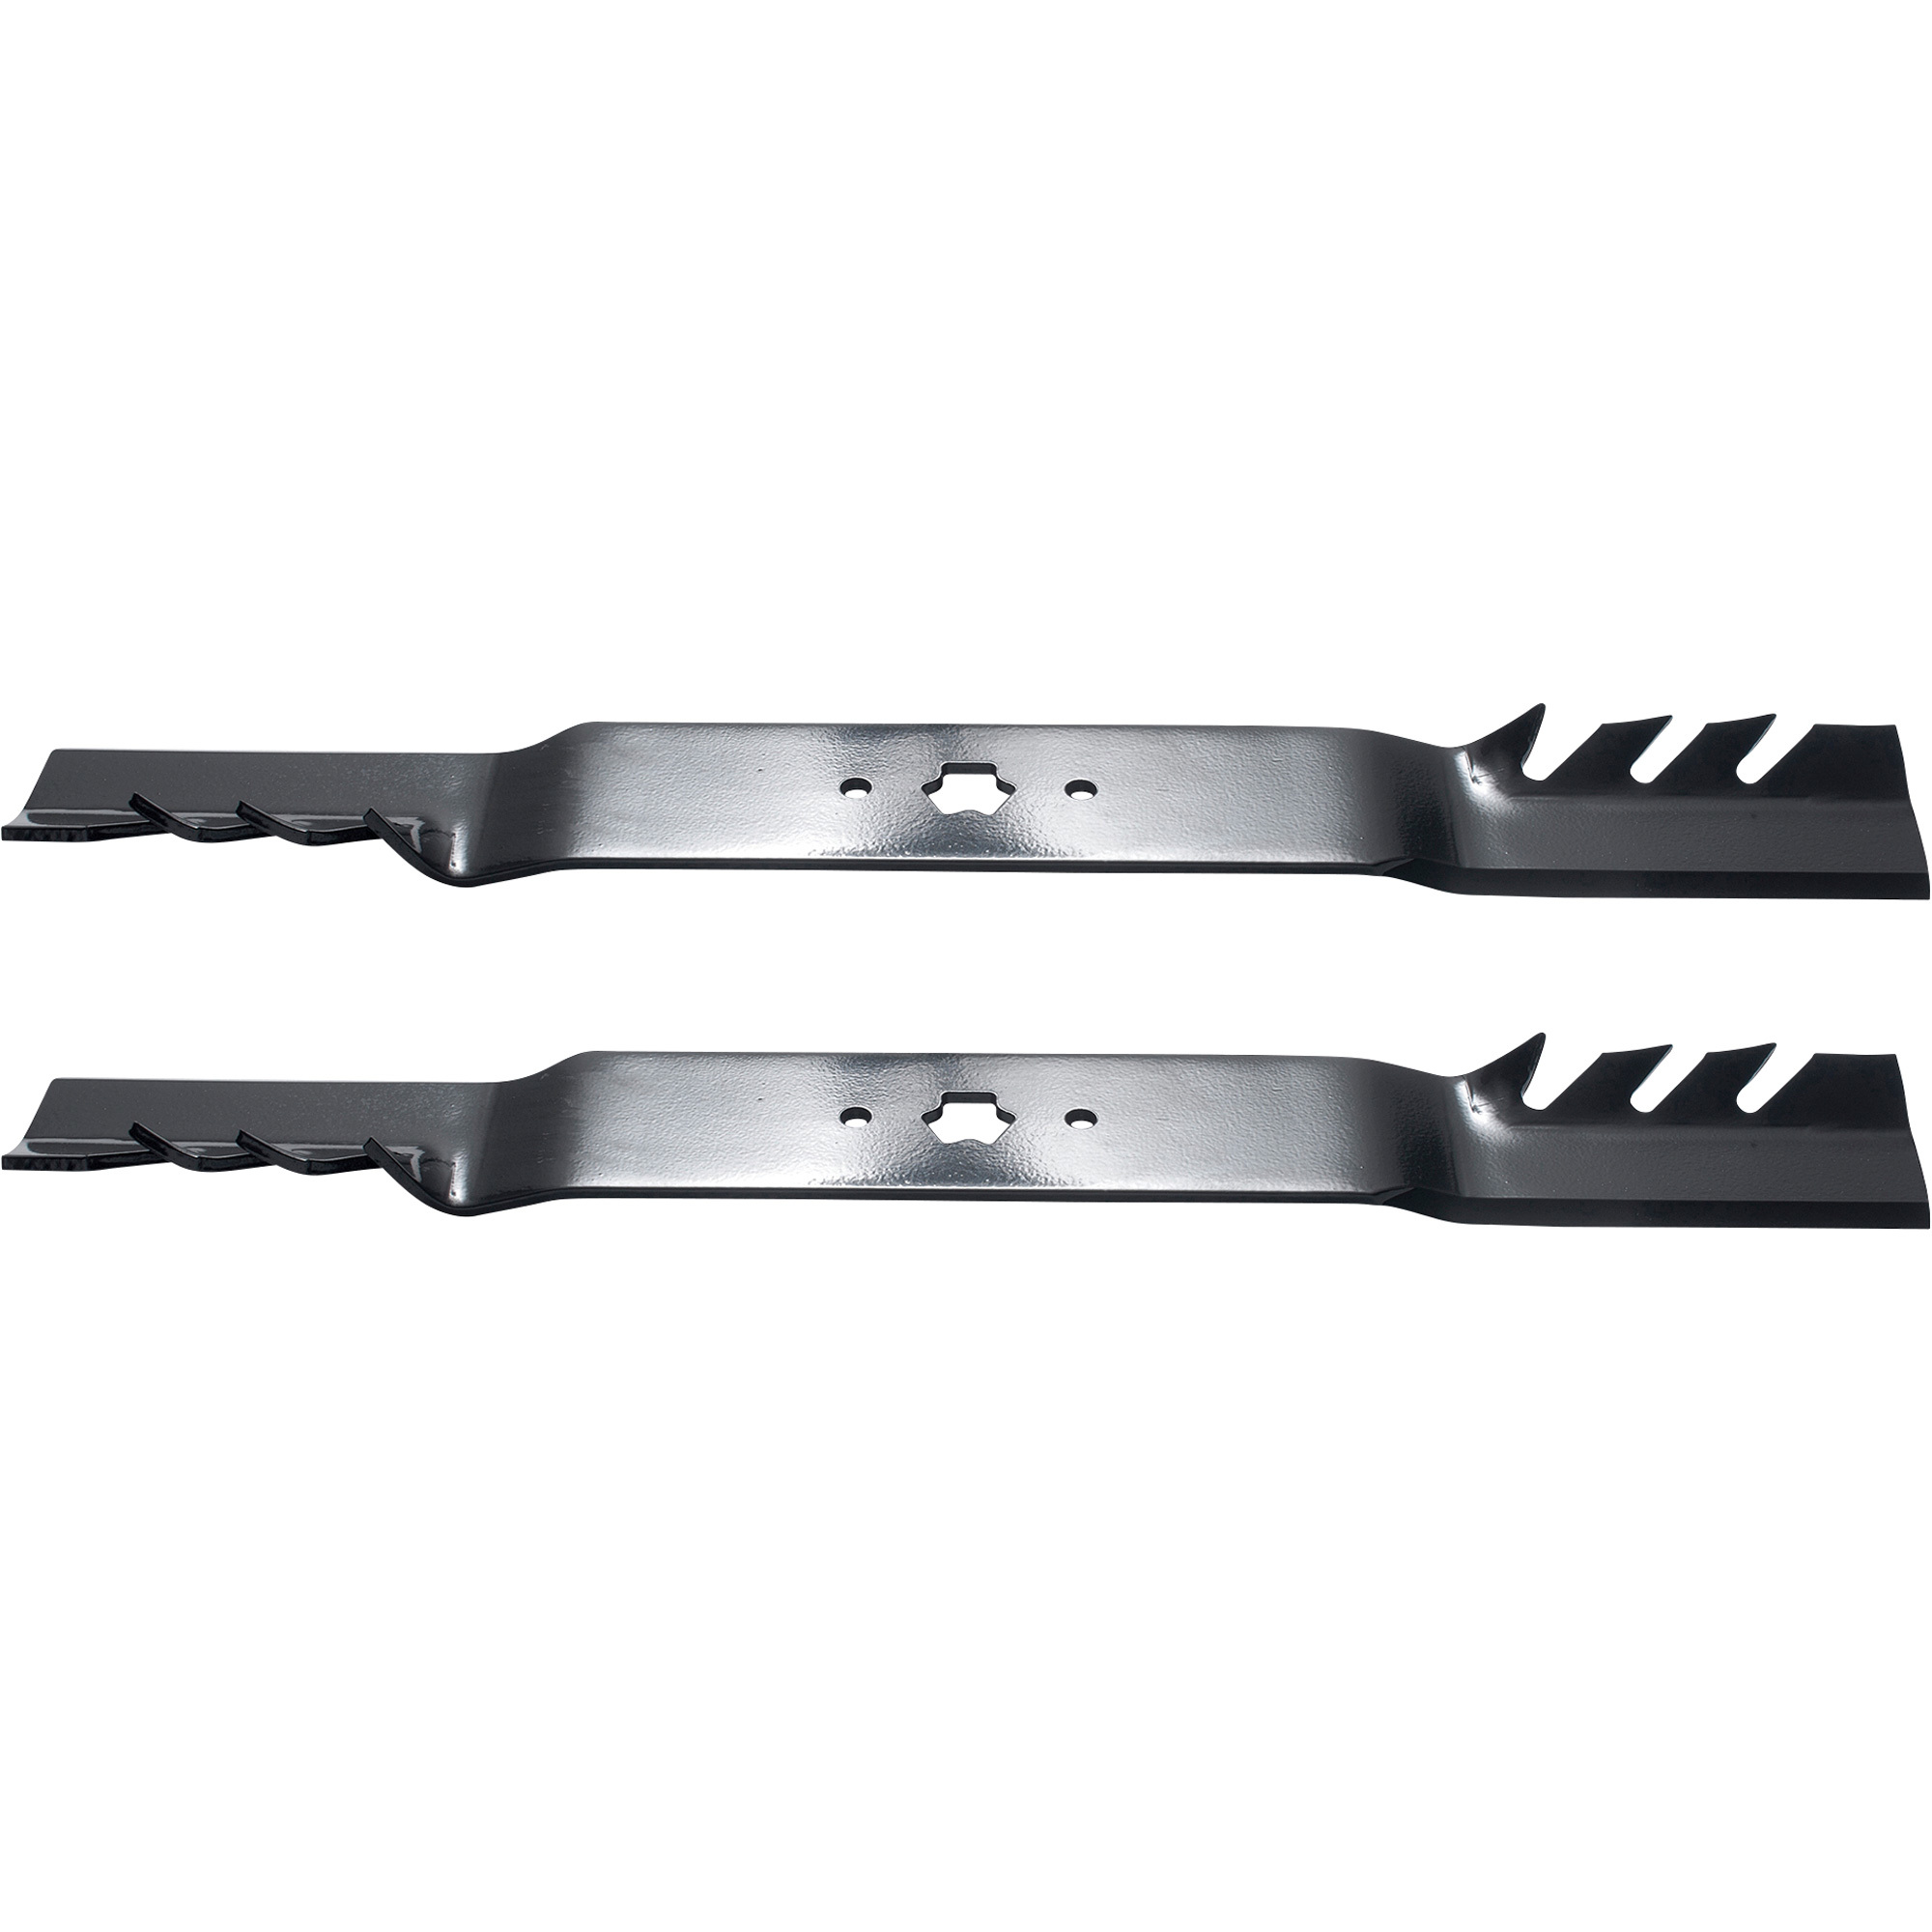 Oregon Gator Replacement Lawn Mower Blades, 2-Piece Set, Fits 42Inch Mowers, Model 528918